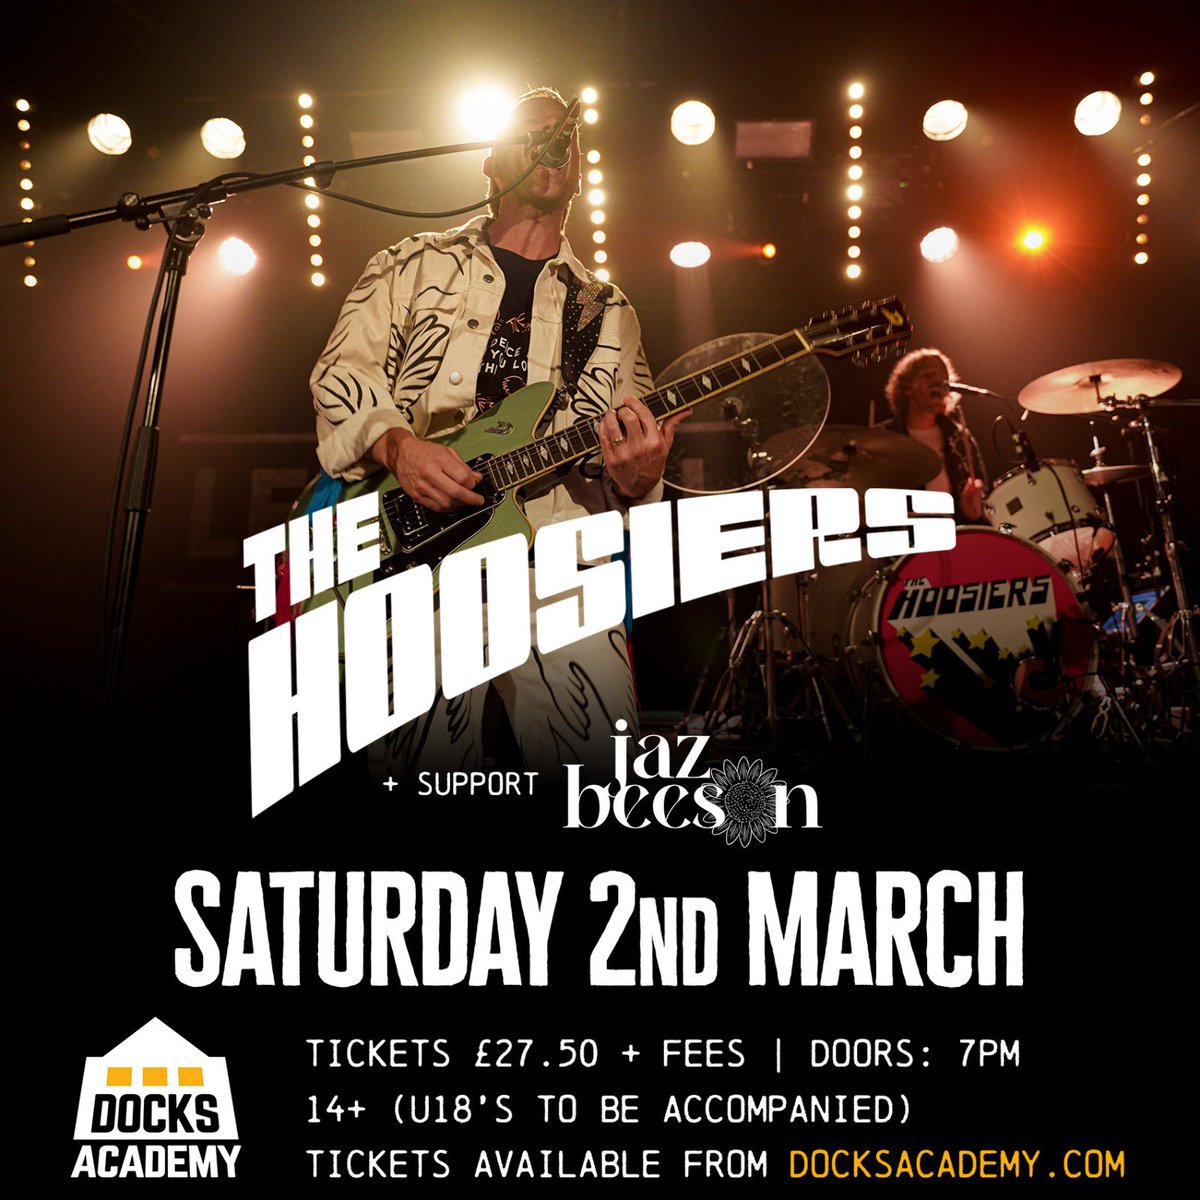 Grimsby, we’re coming for you! And we’re stoked to have the magnificent @jazbeeson supporting us at our @DocksAcademy show this Saturday 🙌 A little birdy tells us there are still some tickets available, so snap those up if you wanna join the fun: thehoosiers.com/shows 🎉